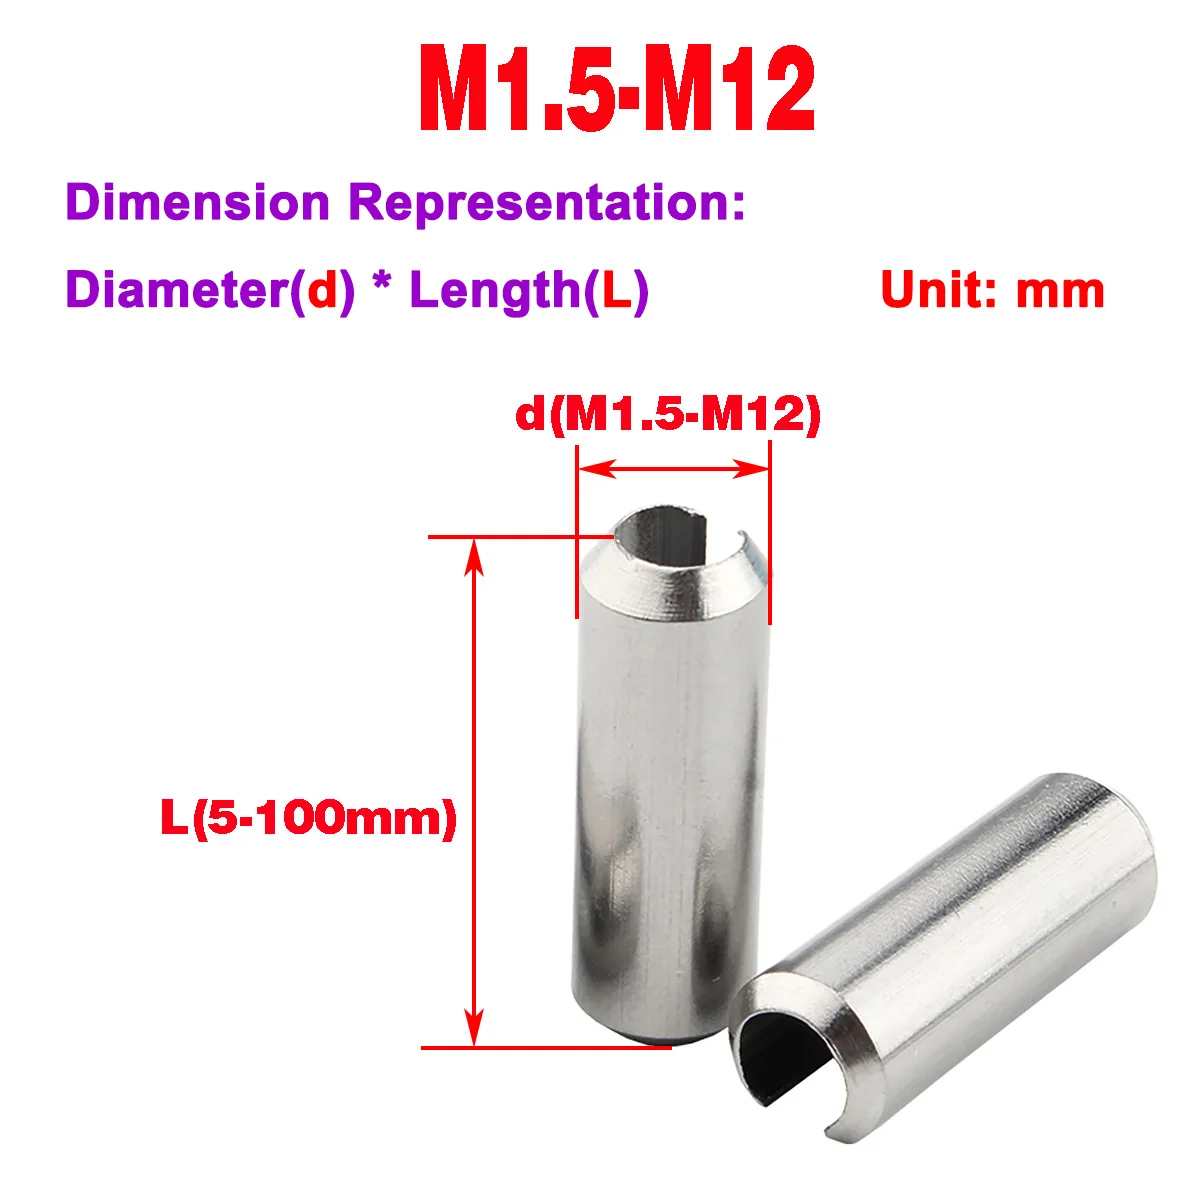 

304 Stainless Steel Elastic Cylindrical Pin / Cotter Pin / Locating Pin Spring Pin / Hollow Pin Shaft M1.5-M12